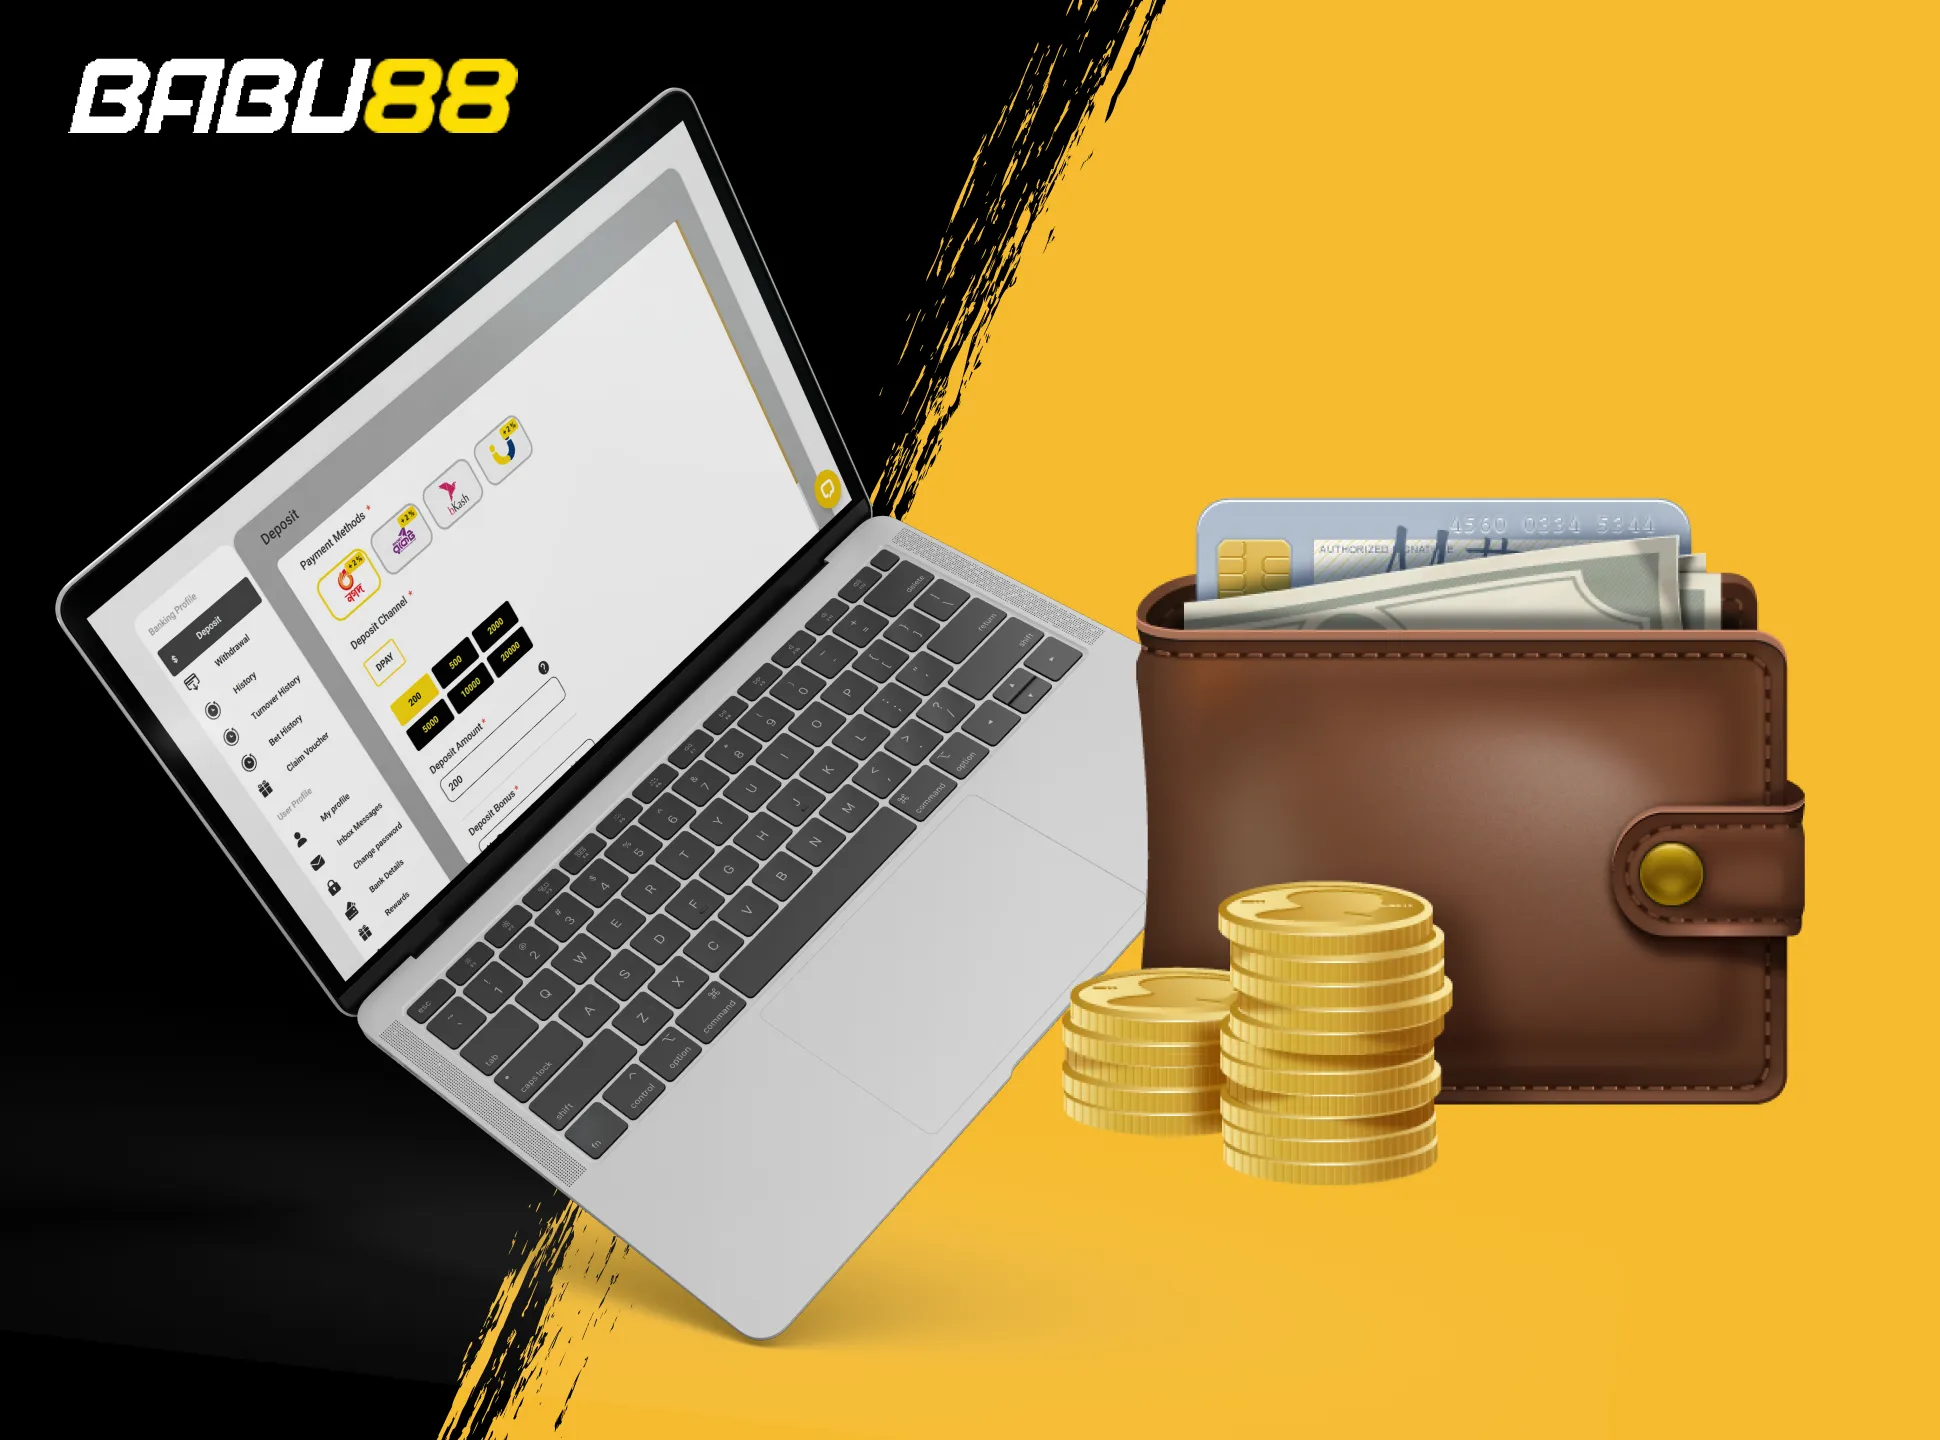 Babu88 has all the popular and mostly used payment methods in Bangladesh.